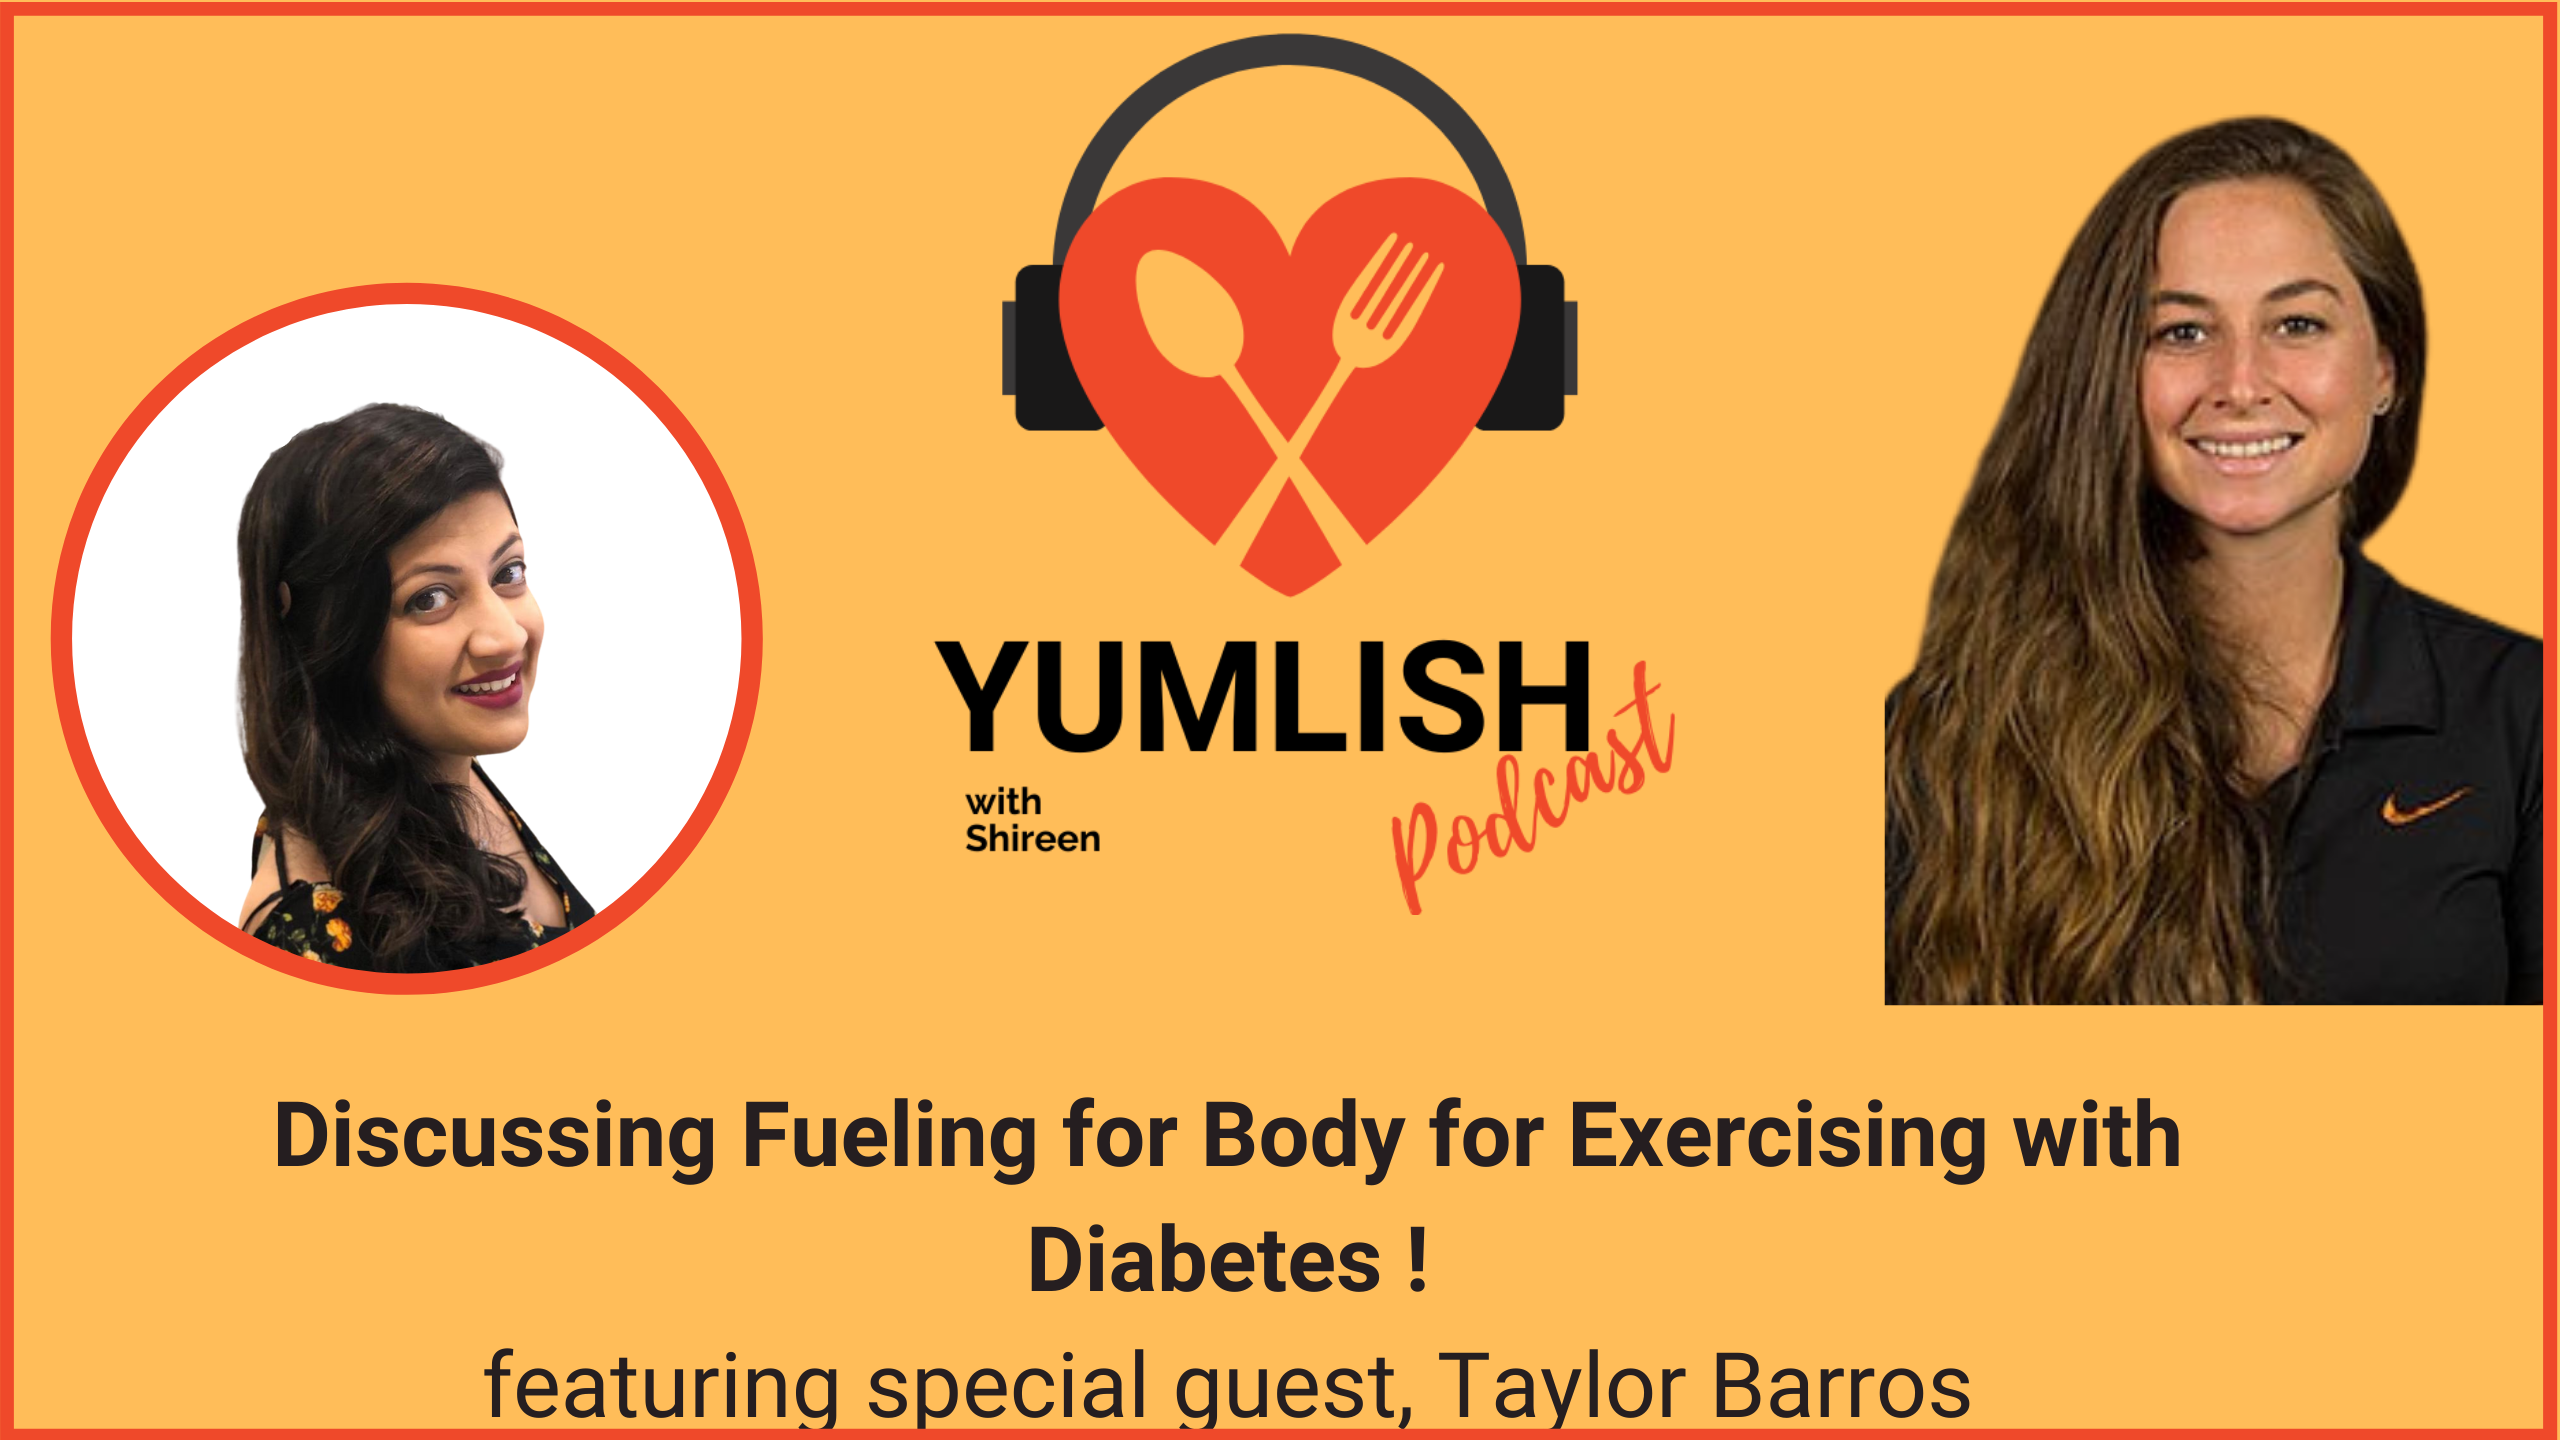 Fueling Your Body for Exercising with Diabetes